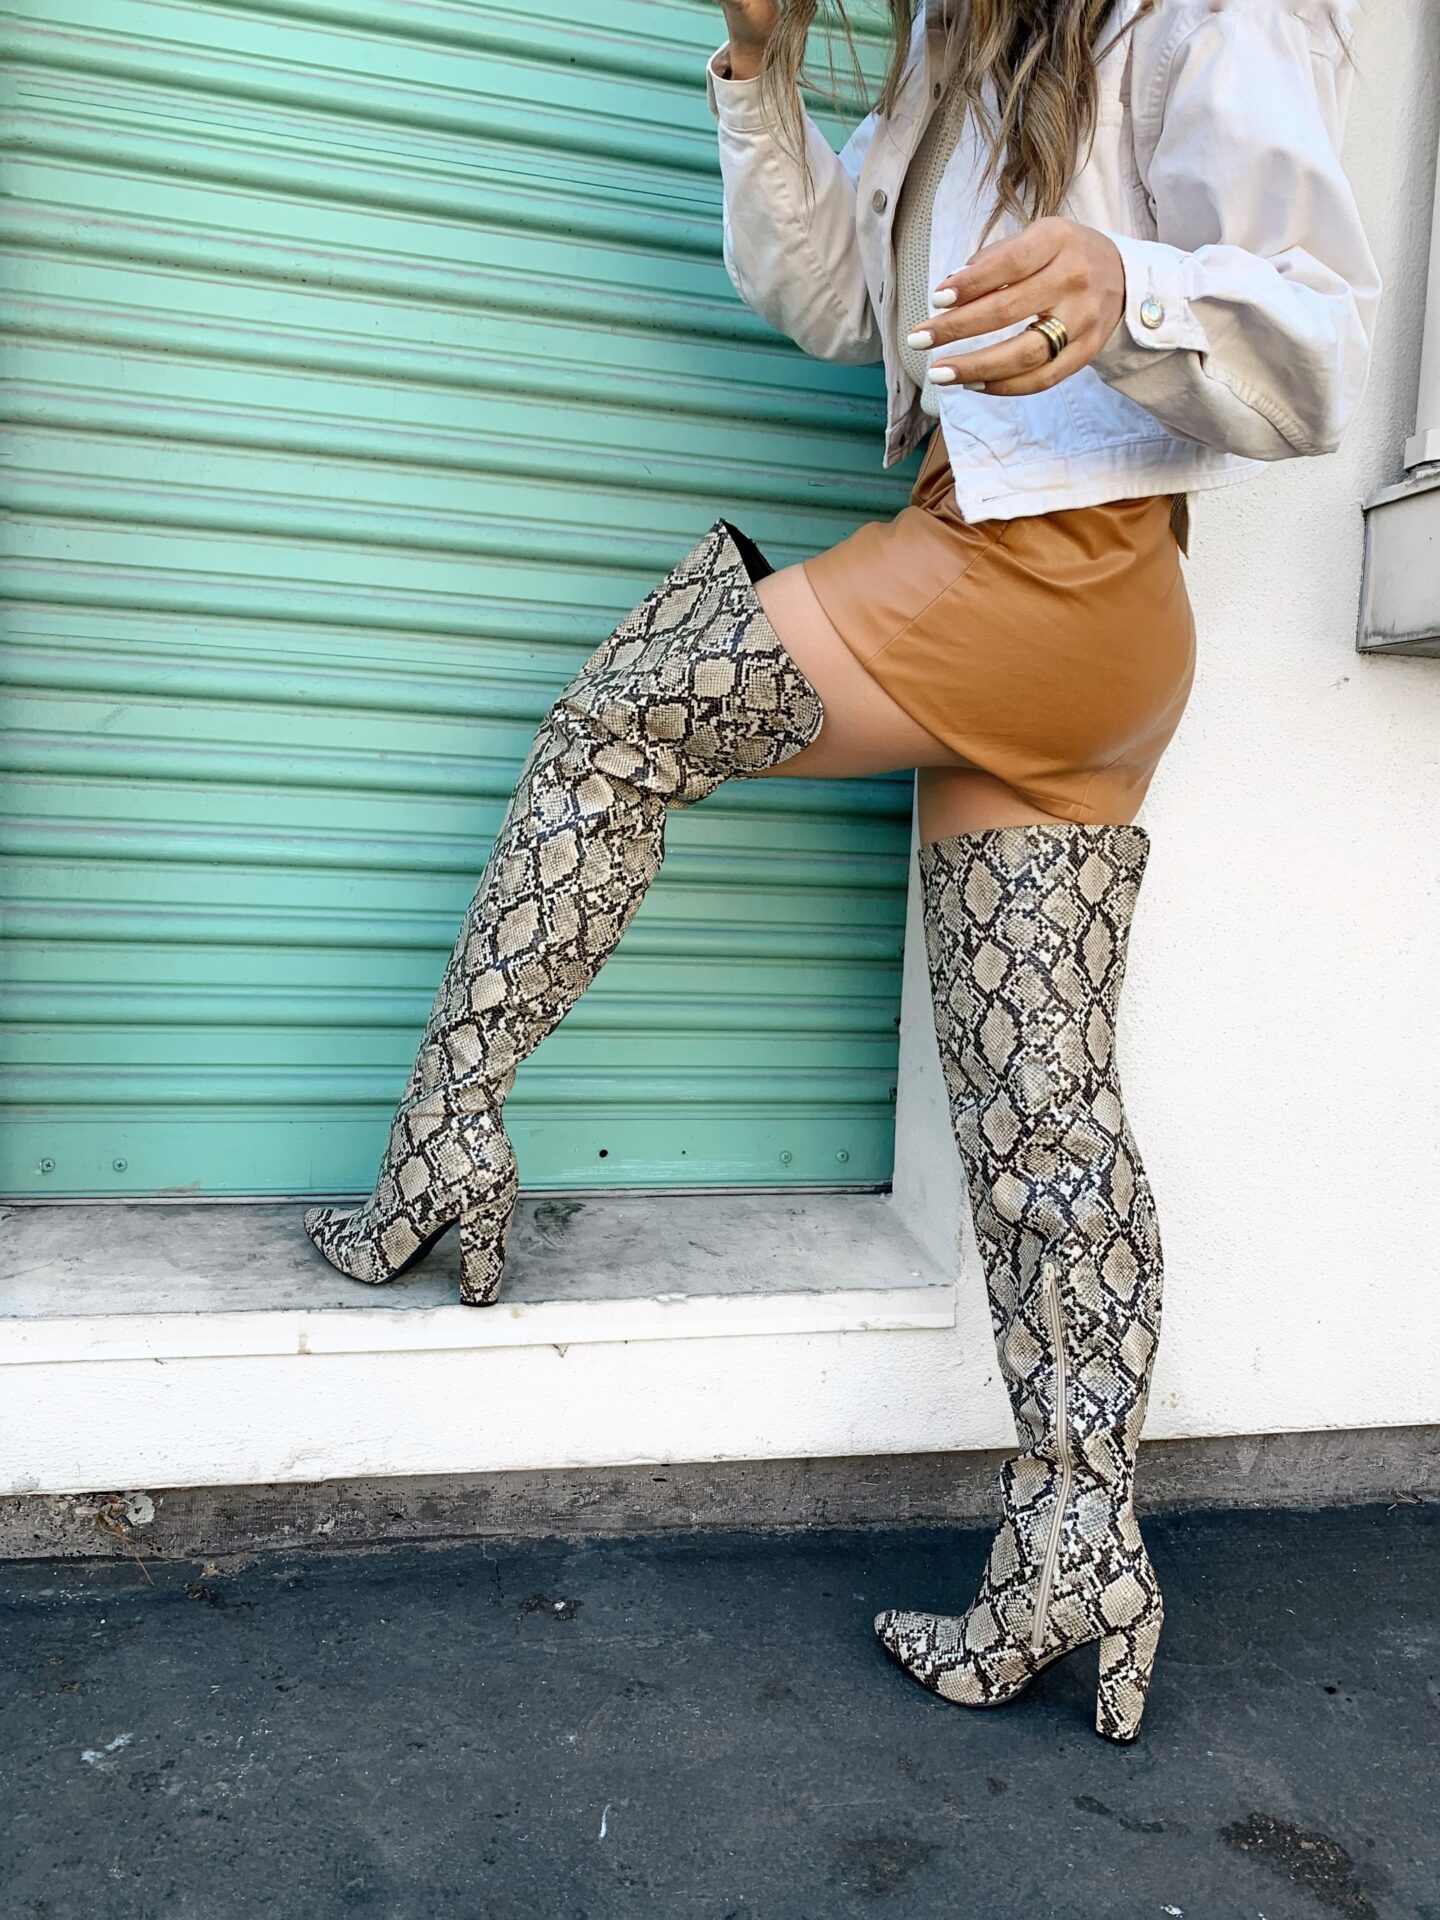 Alexis Alcala sharing this seasons hottest winter boots wearing Cupid and zooshoo